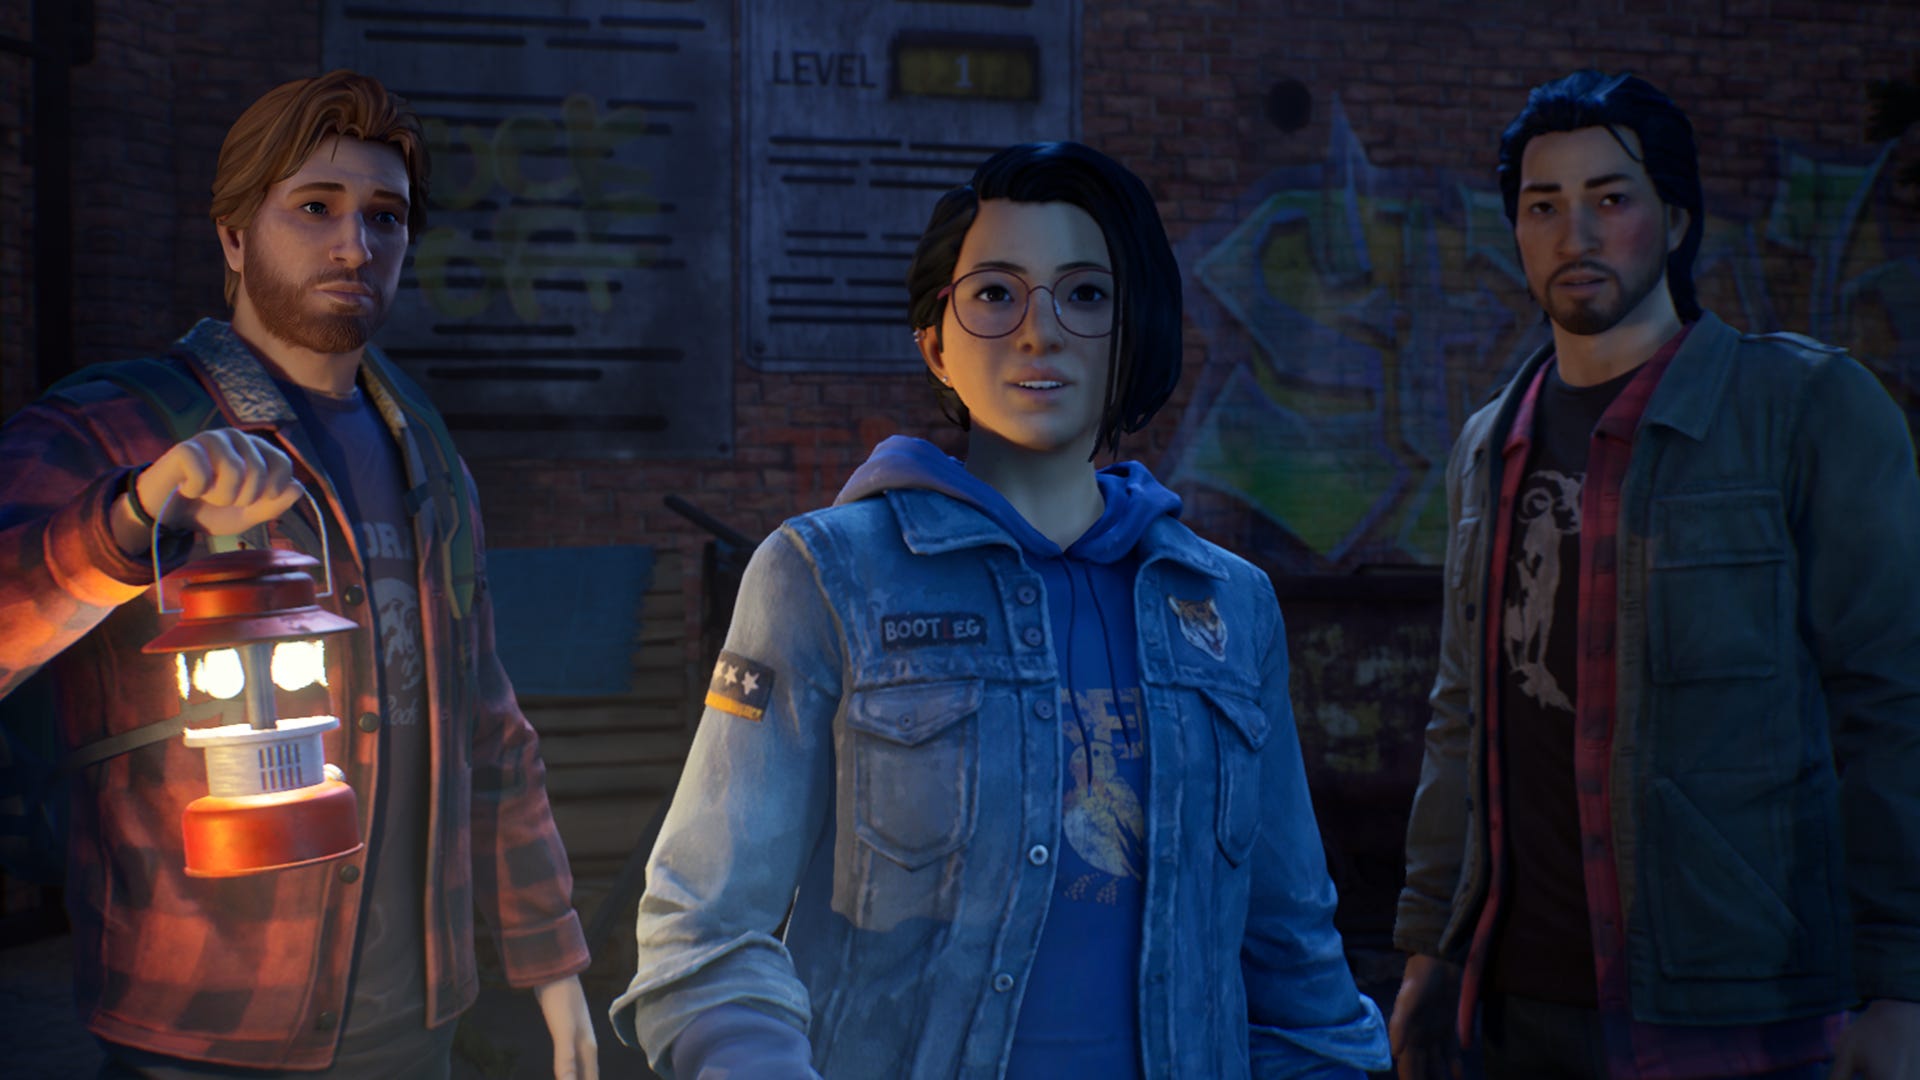 'Life is Strange: True Colors' characters Ryan, Alex, and Gabe